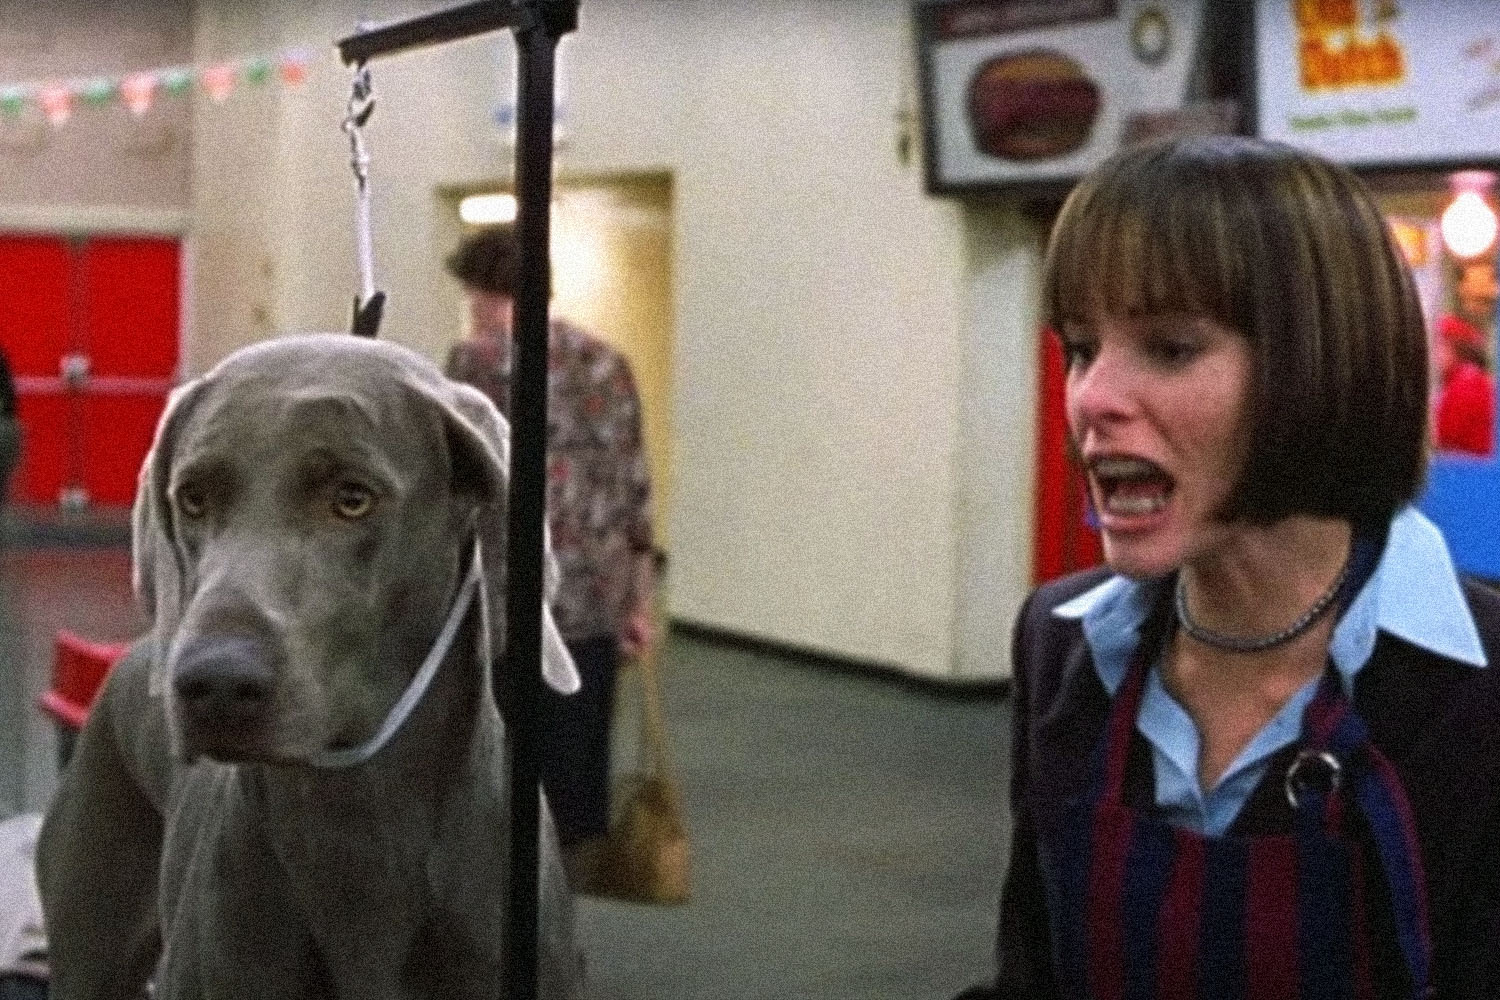 Parker Posey in "Best in Show"